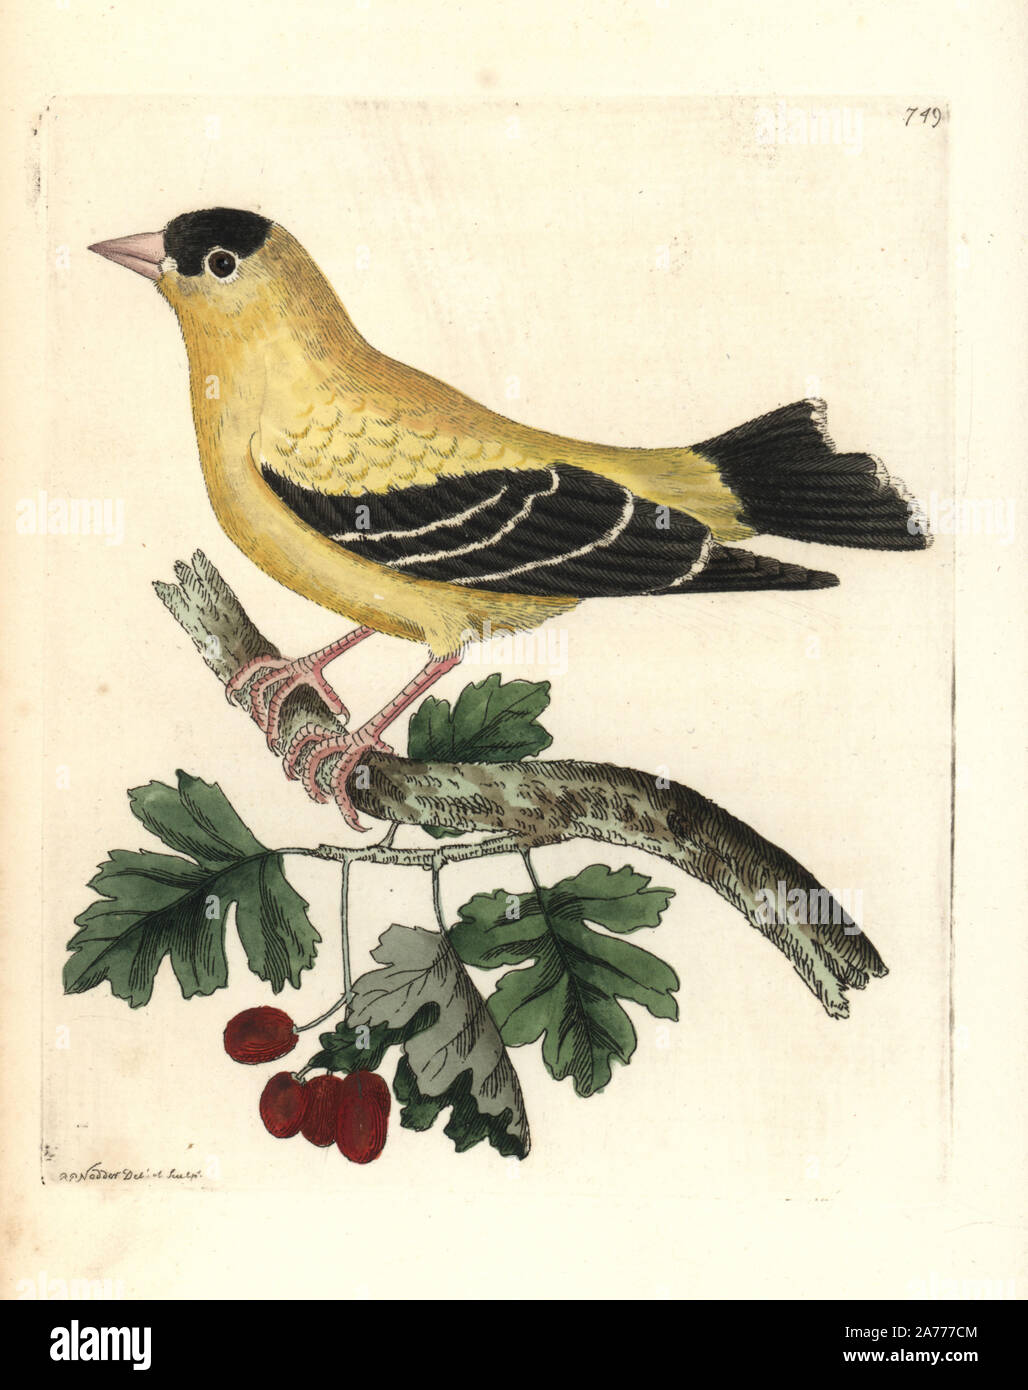 American goldfinch, Carduelis tristis. Illustration drawn and engraved by Richard Polydore Nodder. Handcoloured copperplate engraving from George Shaw and Frederick Nodder's 'The Naturalist's Miscellany,' London, 1805. Stock Photo